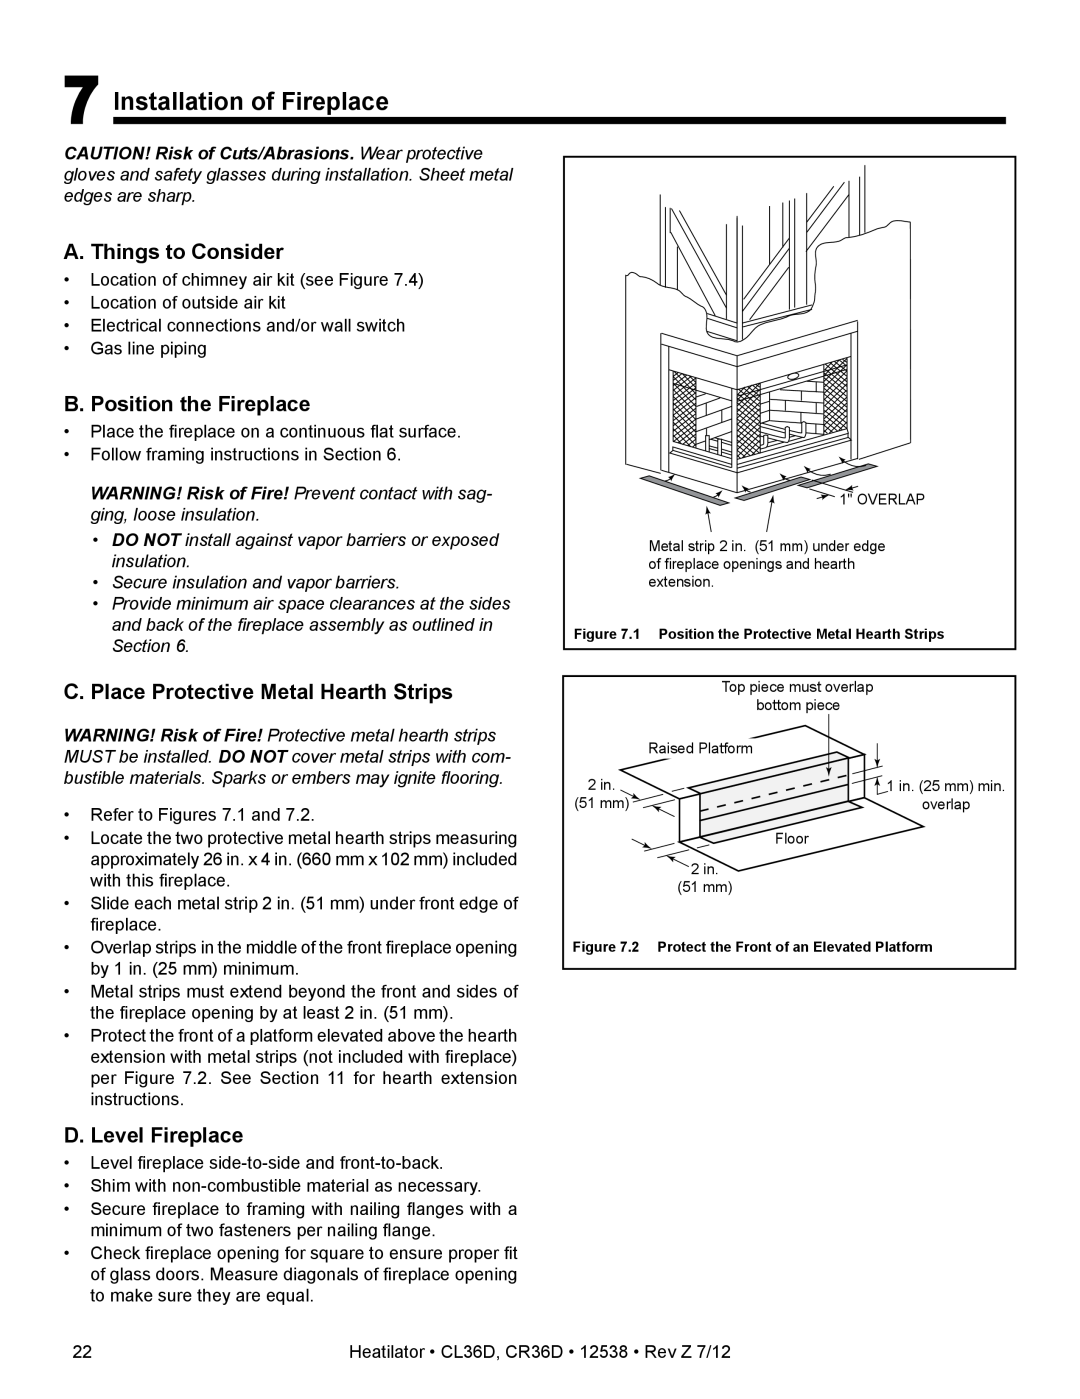 Heatiator CL36D 7Installation of Fireplace, A. Things to Consider, B. Position the Fireplace, D. Level Fireplace 